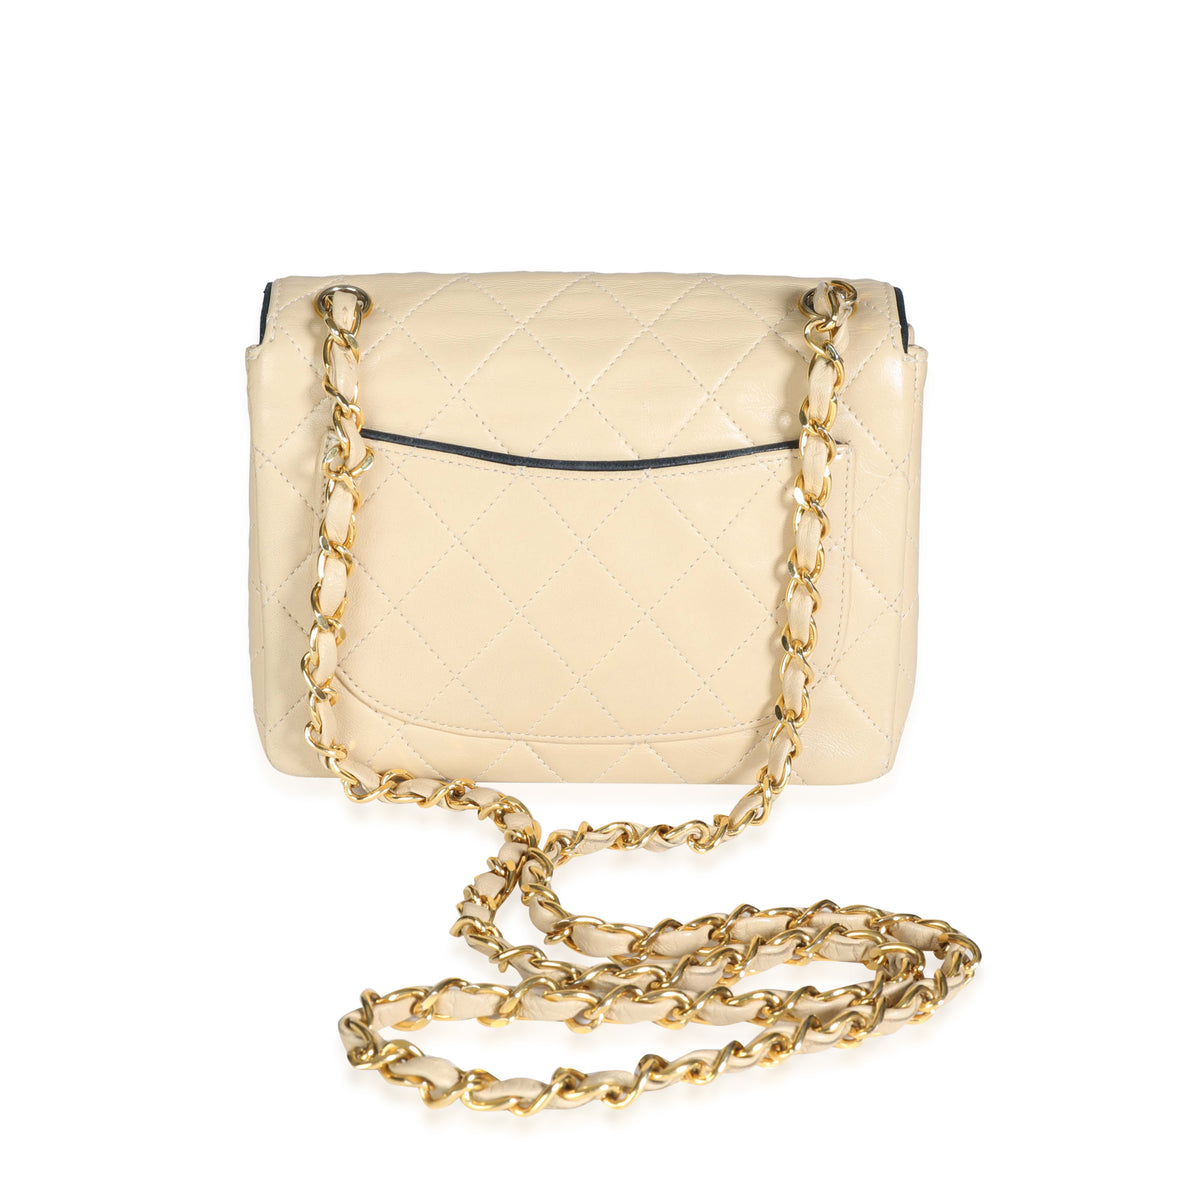 Chanel Vintage Beige Quilted Lambskin Mini Square Flap Bag